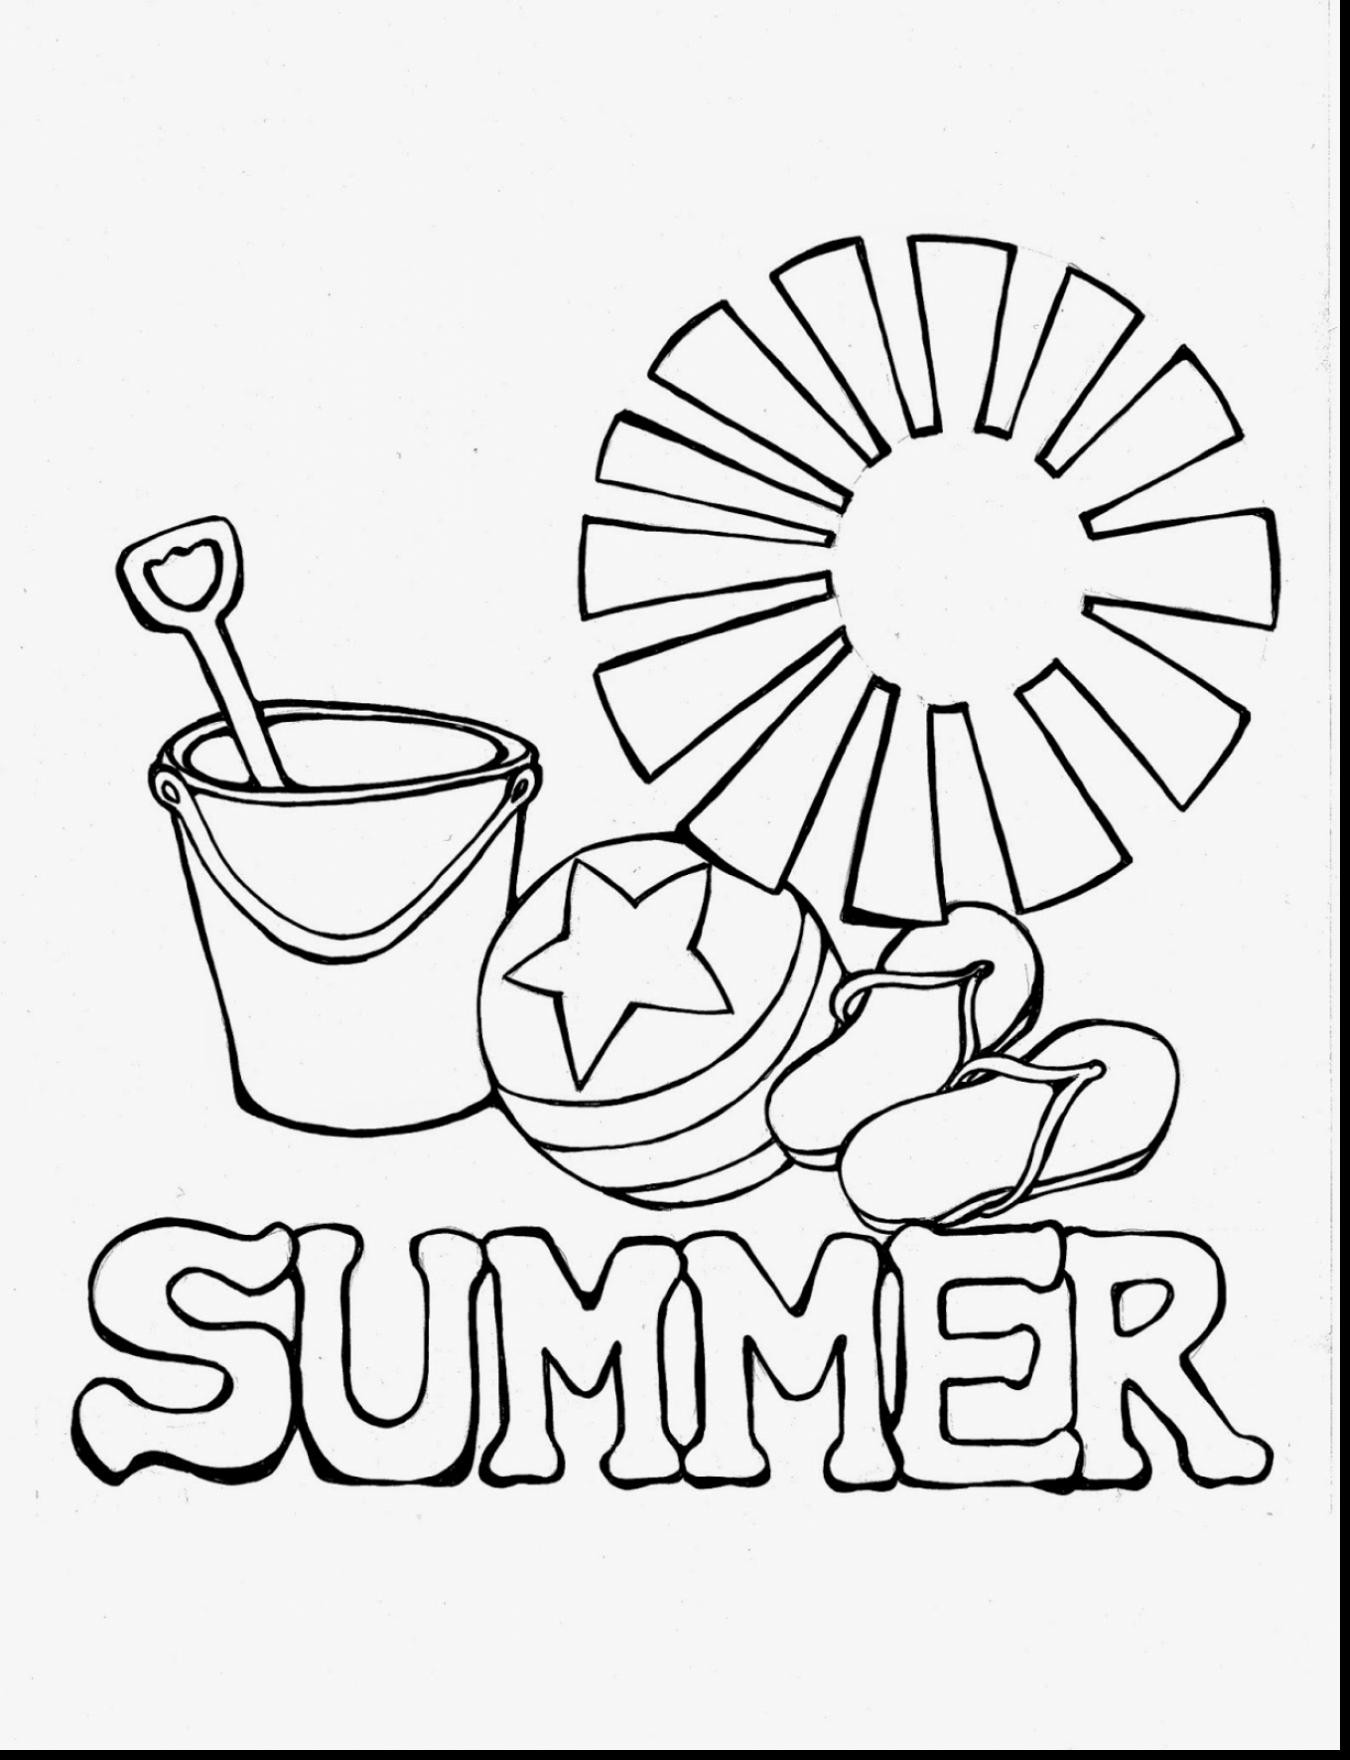 Summer Fun Coloring Pages At Getdrawings | Free Download